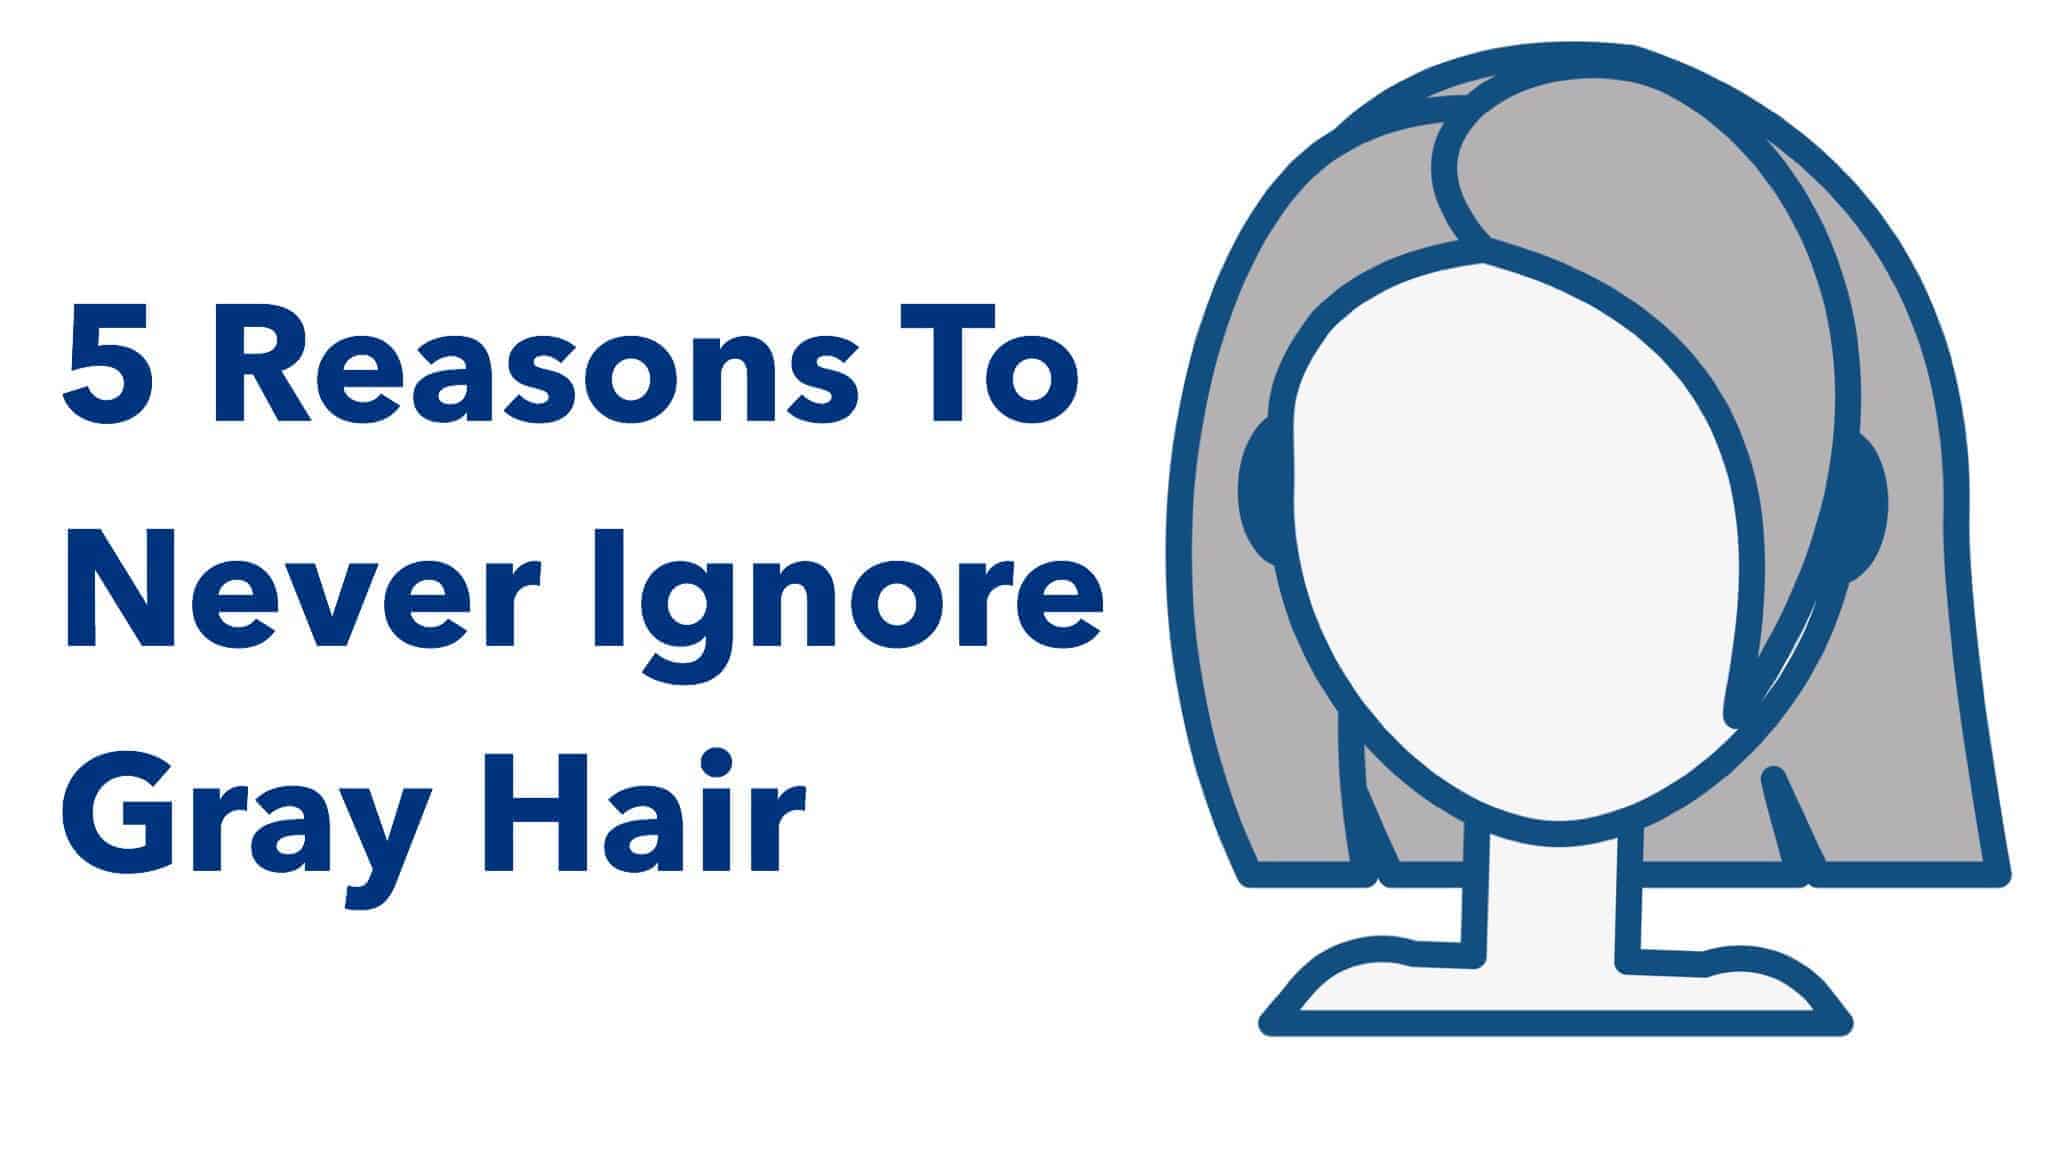 5 Reasons To Never Ignore Gray Hair